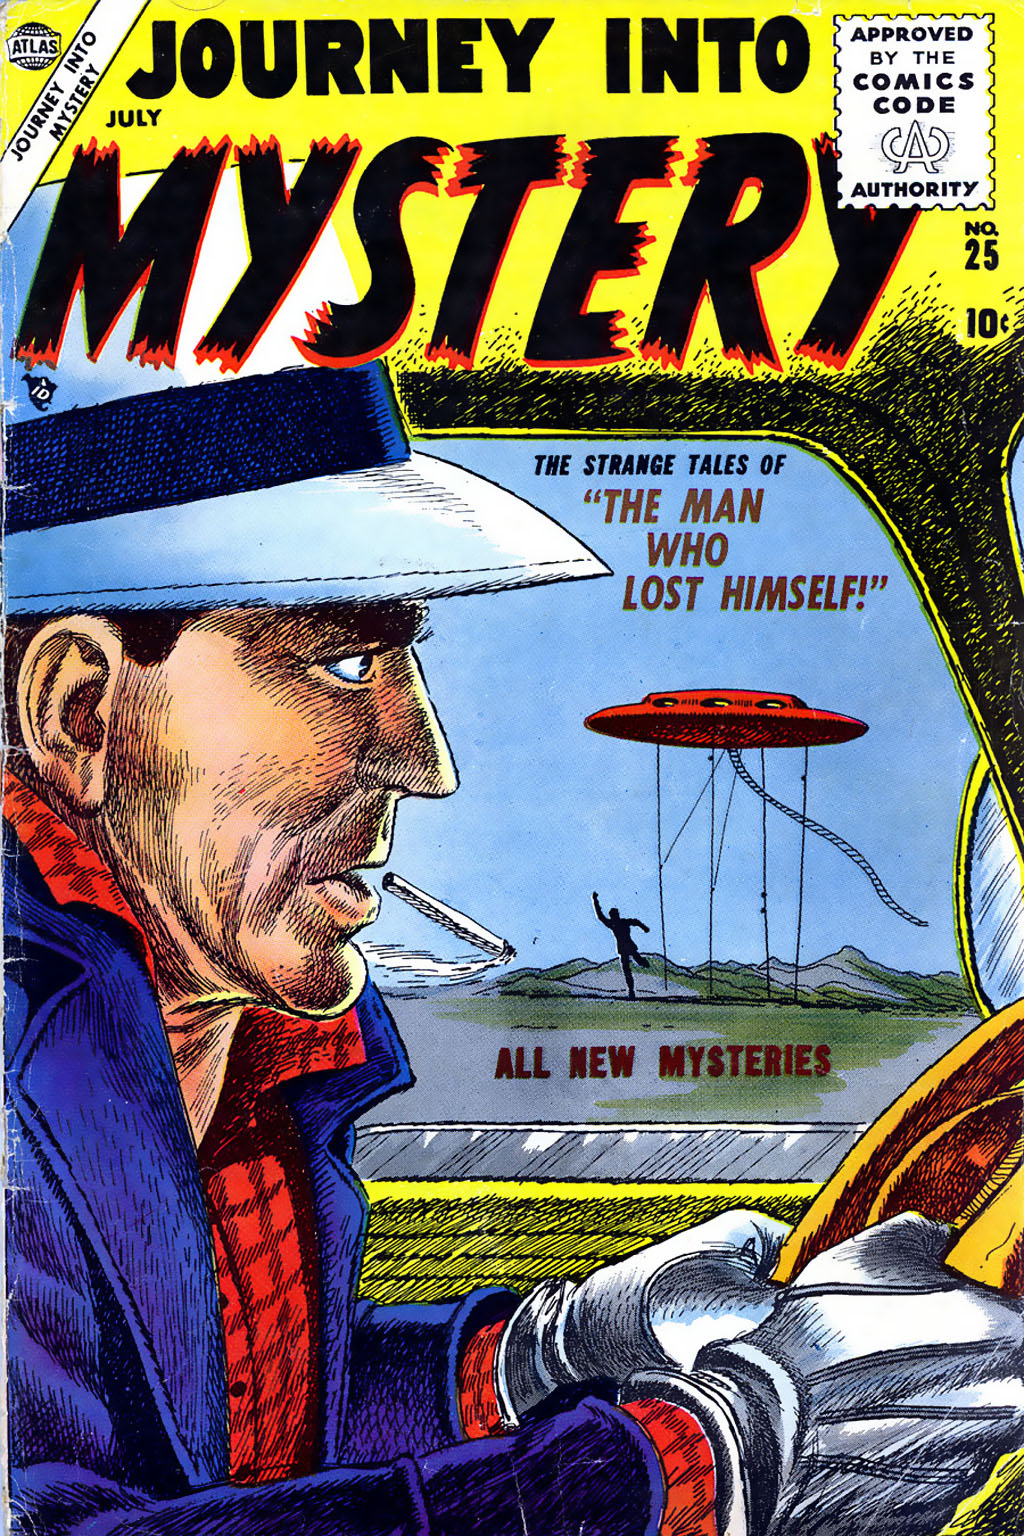 Read online Journey Into Mystery (1952) comic -  Issue #25 - 1